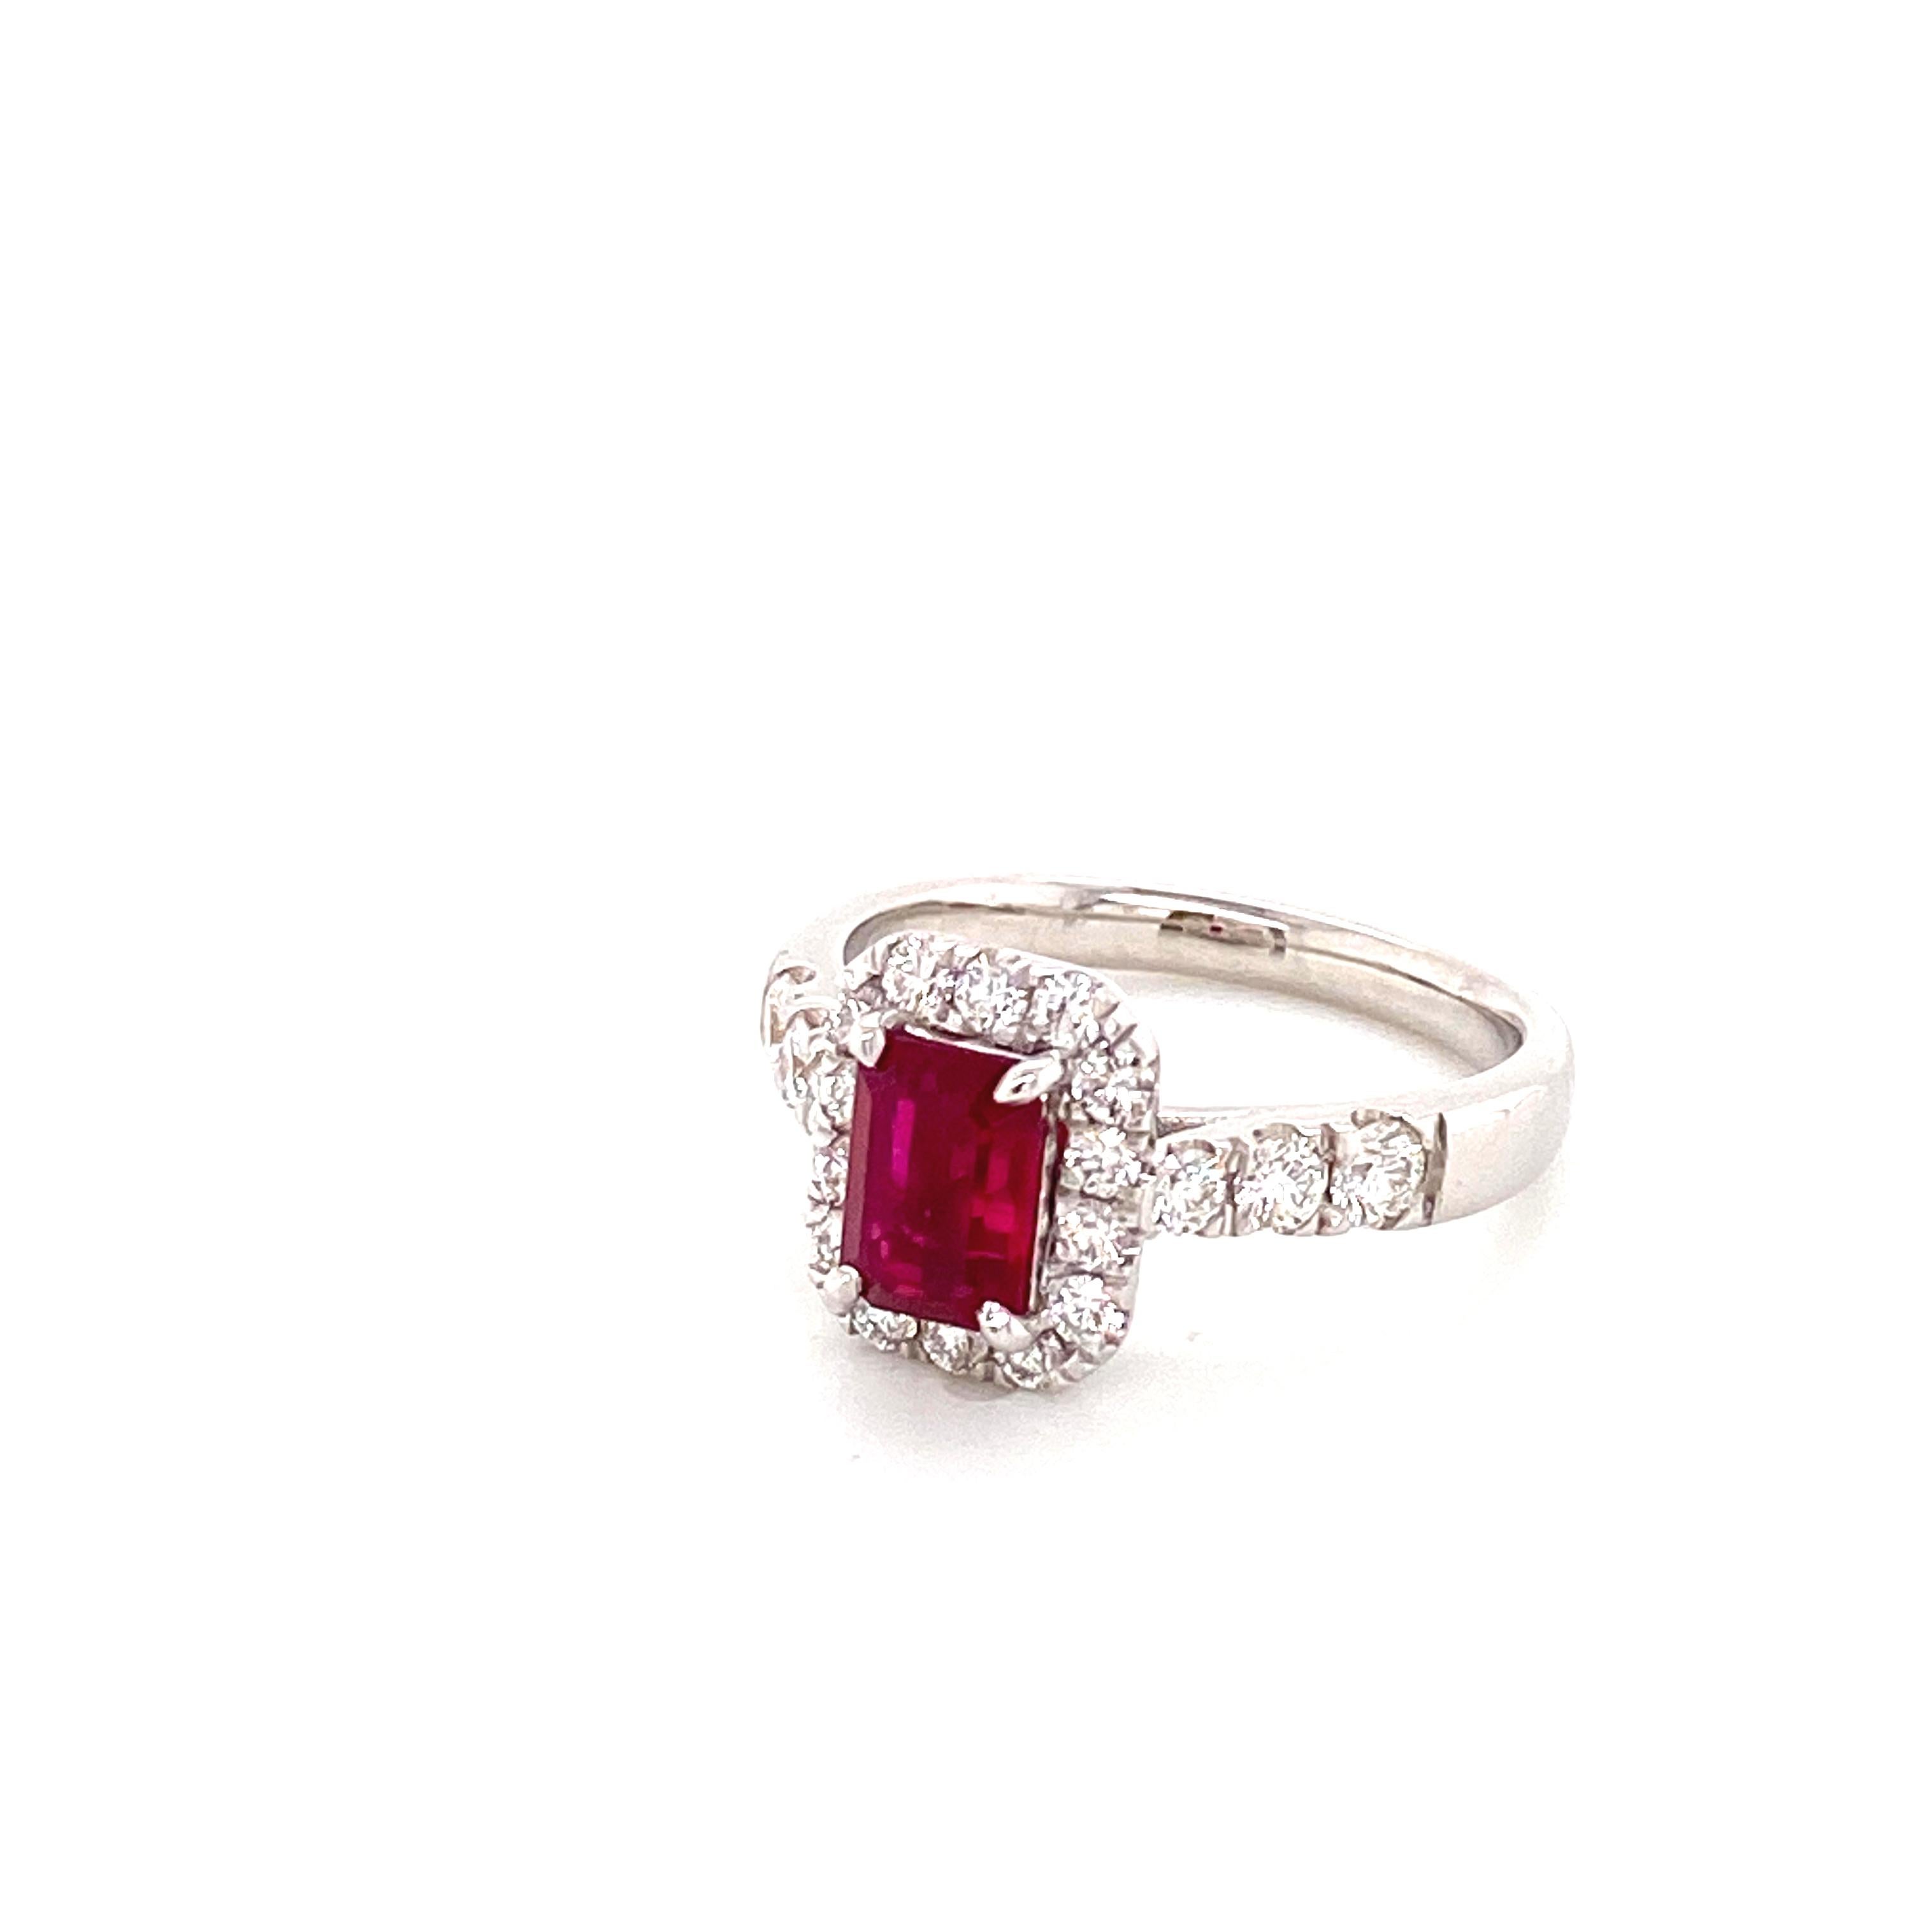 Emerald Cut 1.28 Carat GRS Certified Pigeon's Blood Burmese Ruby and Diamond Engagement Ring For Sale